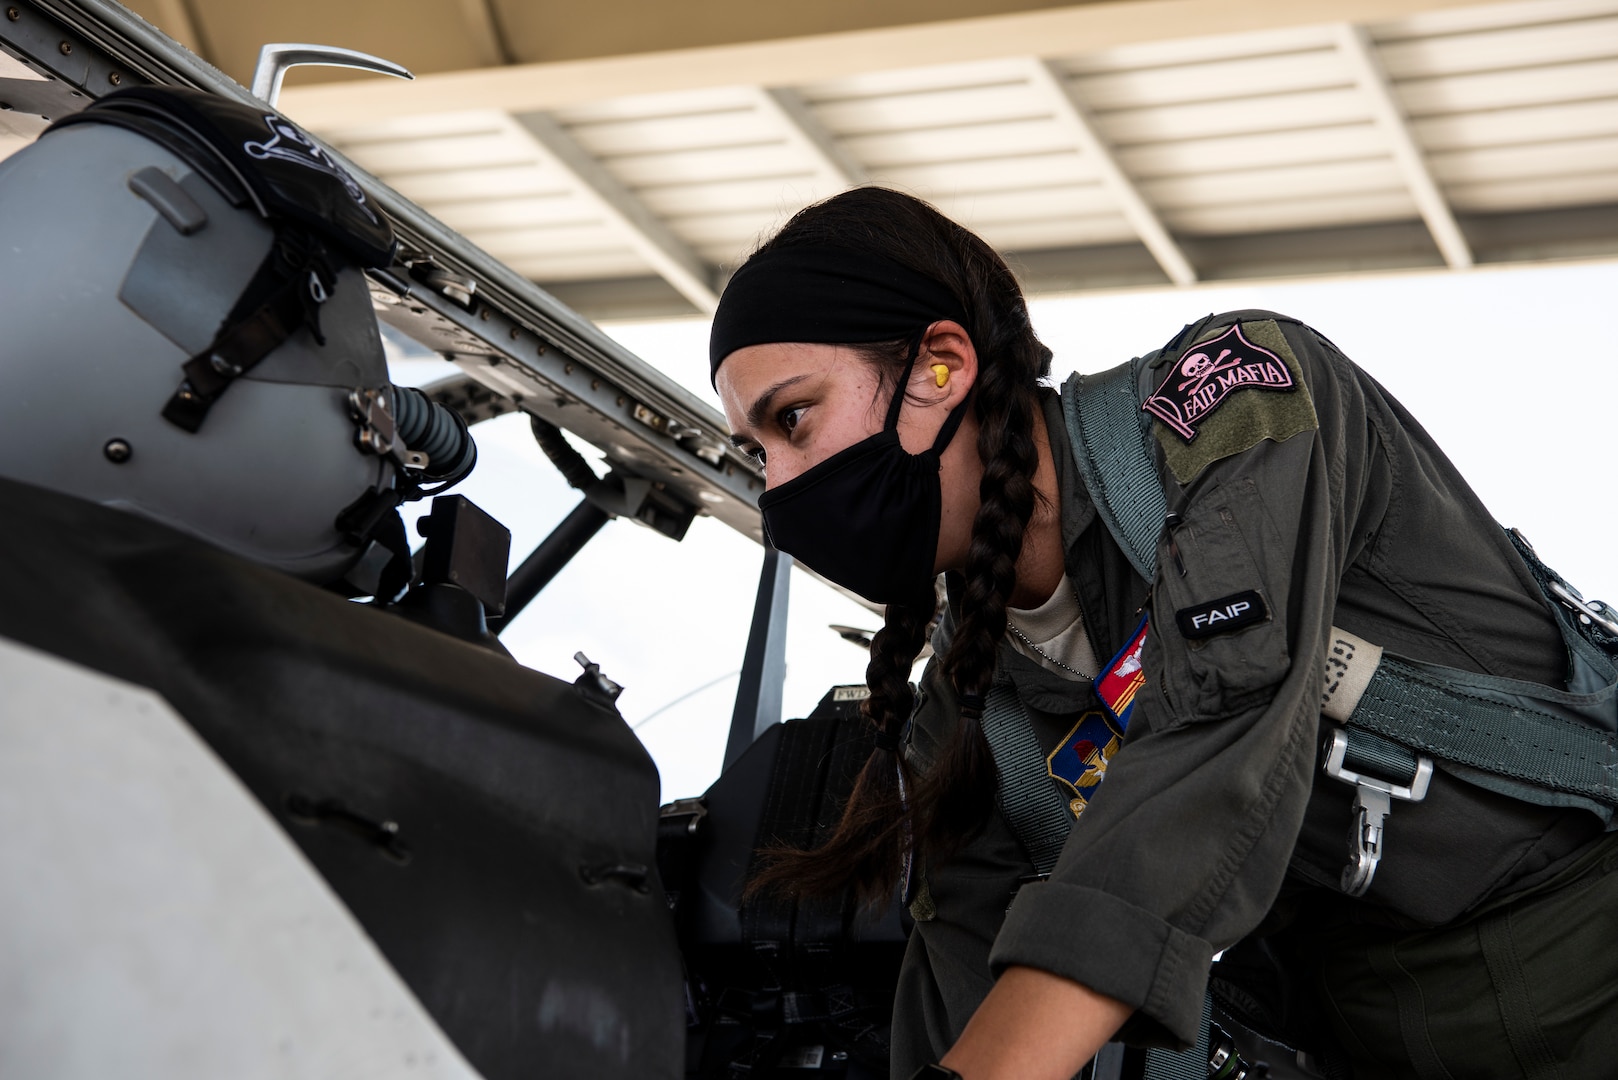 Capt. Kimberly Bray, 47th Operations Support Squadron executive officer and instructor pilot, performs pre-flight checks on a T-6A Texan II at Laughlin Air Force Base, Texas, Aug. 26, 2020. Laughlin observes Women’s Equality Day by flying an all-female formation sortie with instructor and student pilots. (U.S. Air Force photo by Senior Airman Marco A. Gomez)